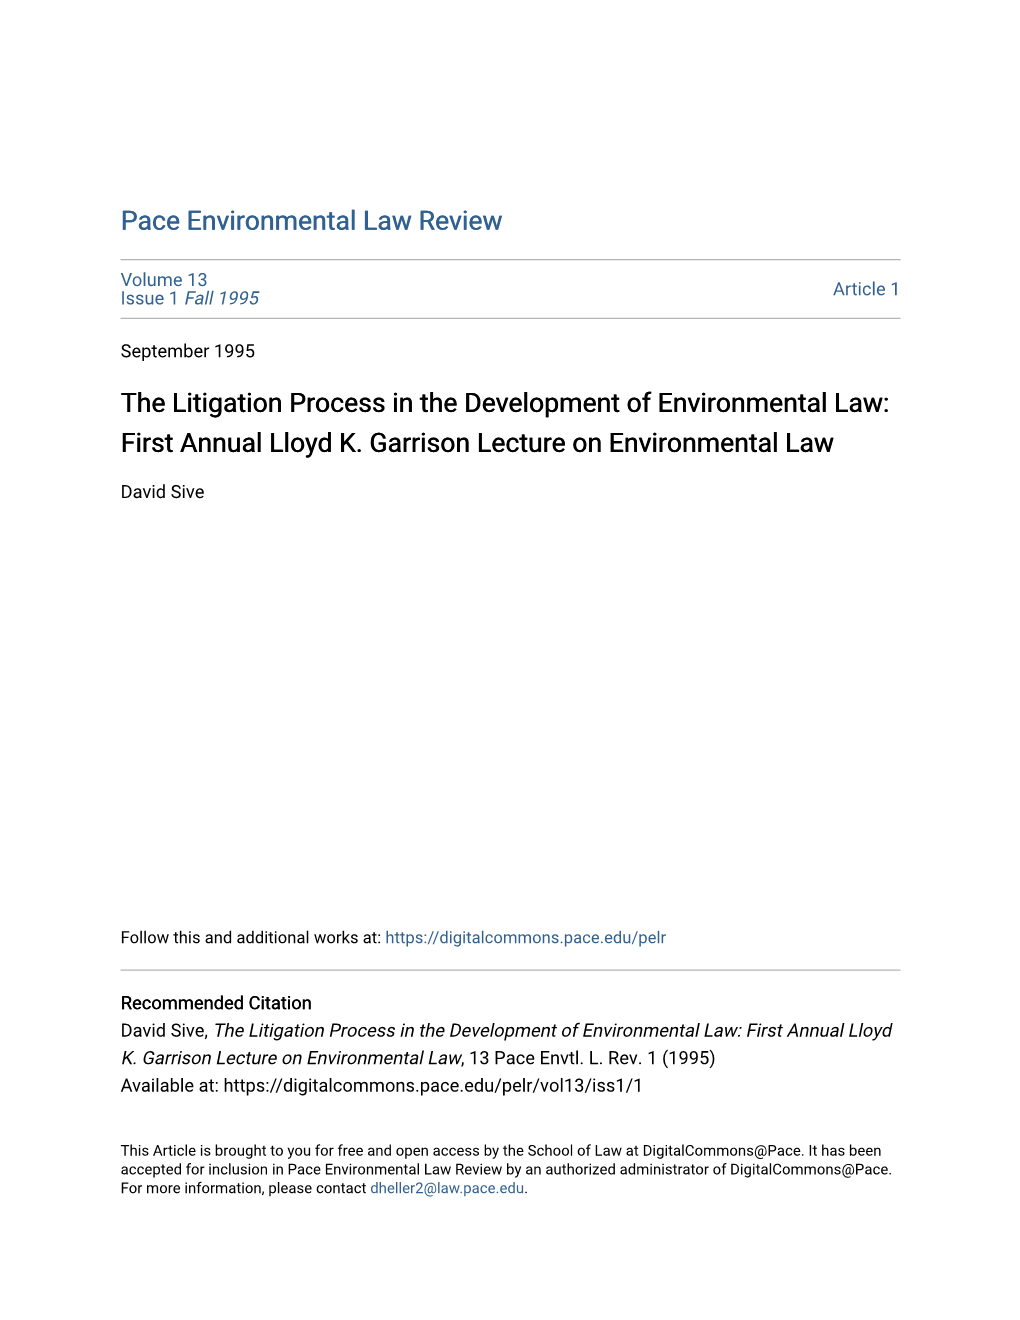 The Litigation Process in the Development of Environmental Law: First Annual Lloyd K